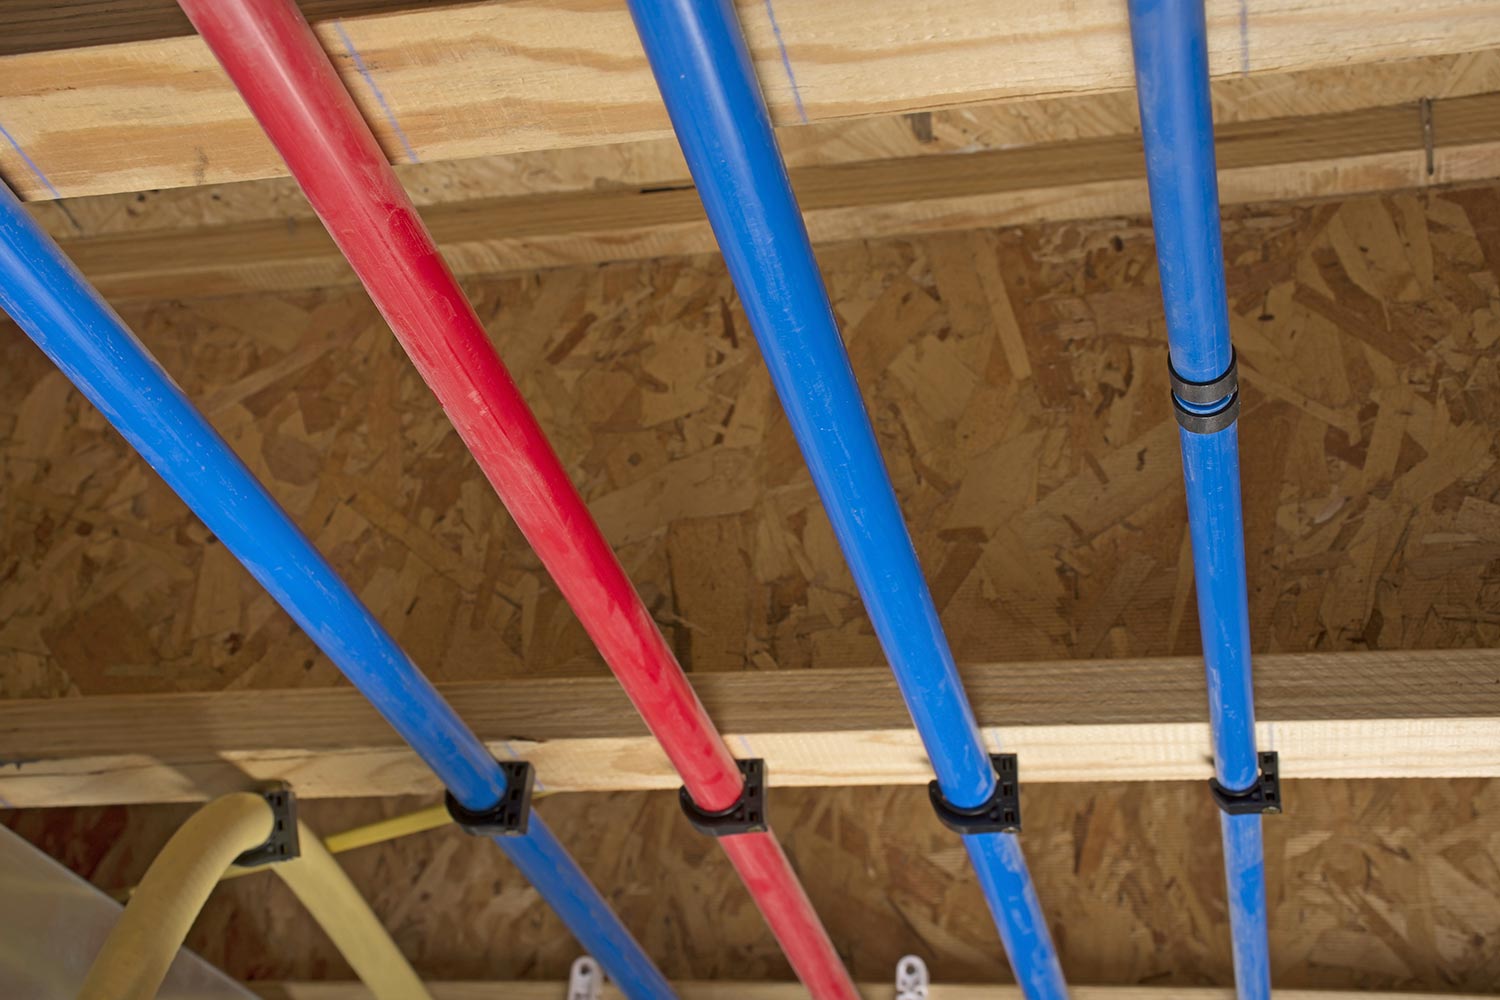 PEX and drain pipes attached to the basement ceiling of a home